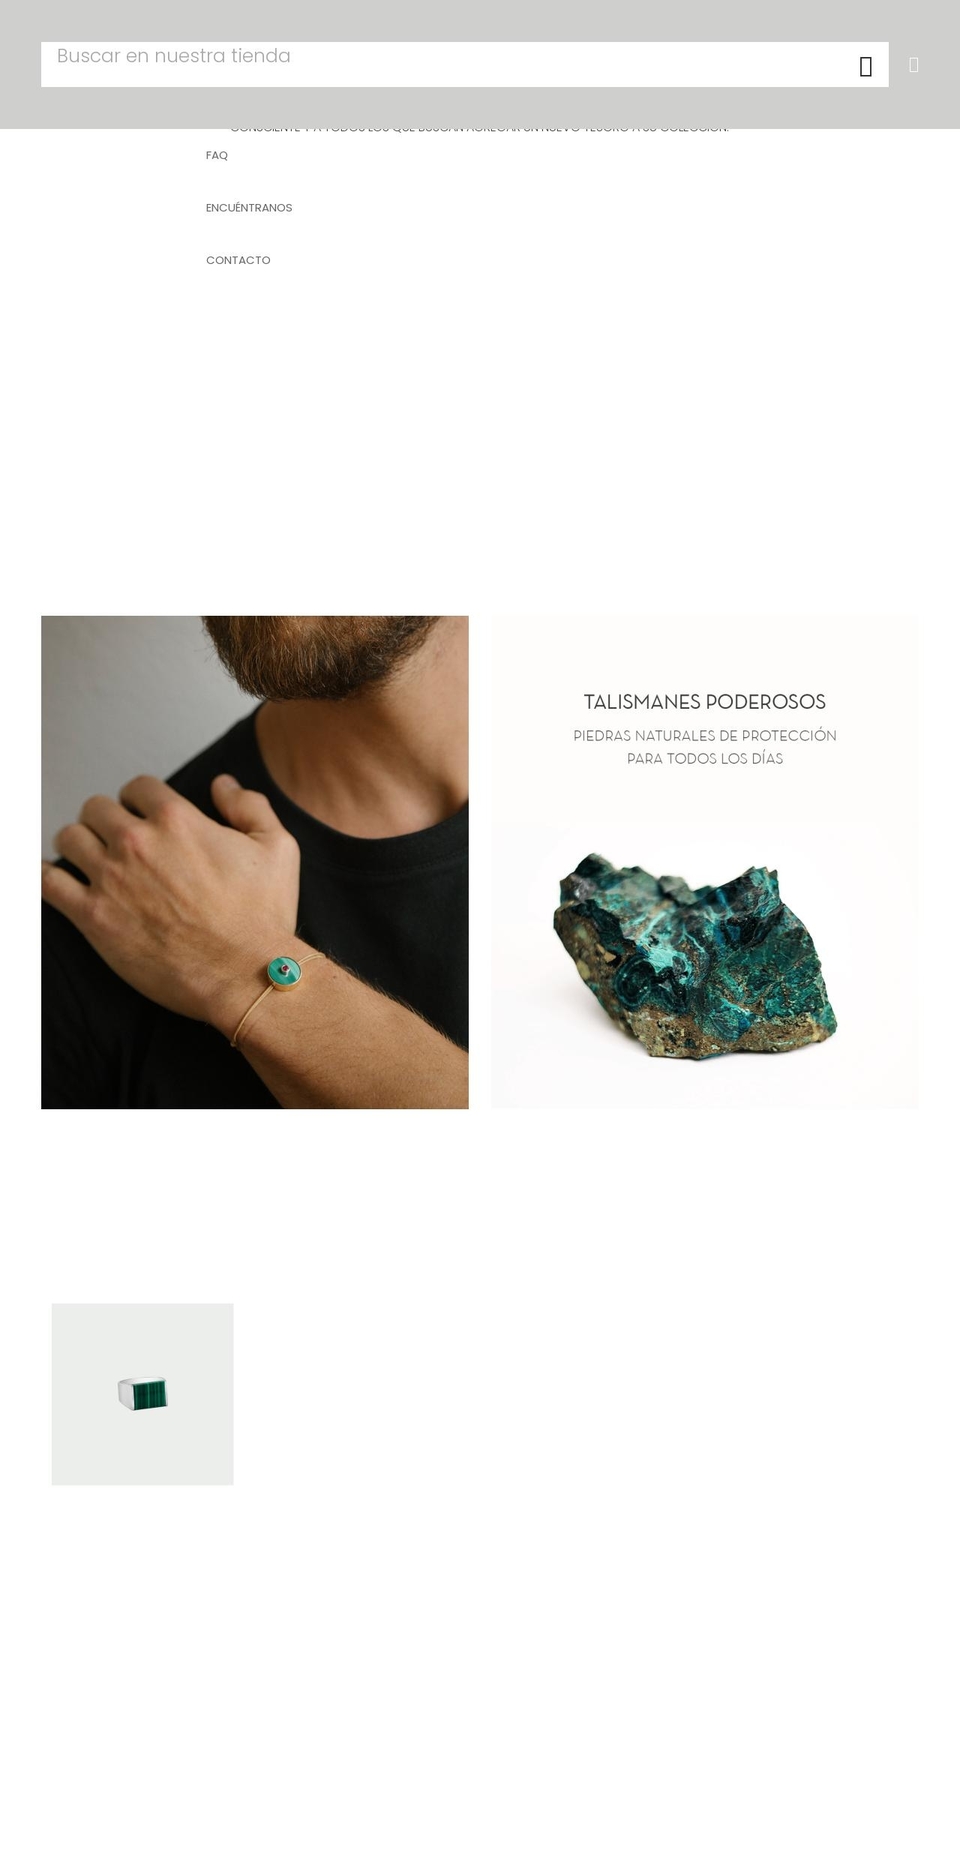 Uniqlo-v-- Shopify theme site example kultjewelry.mx